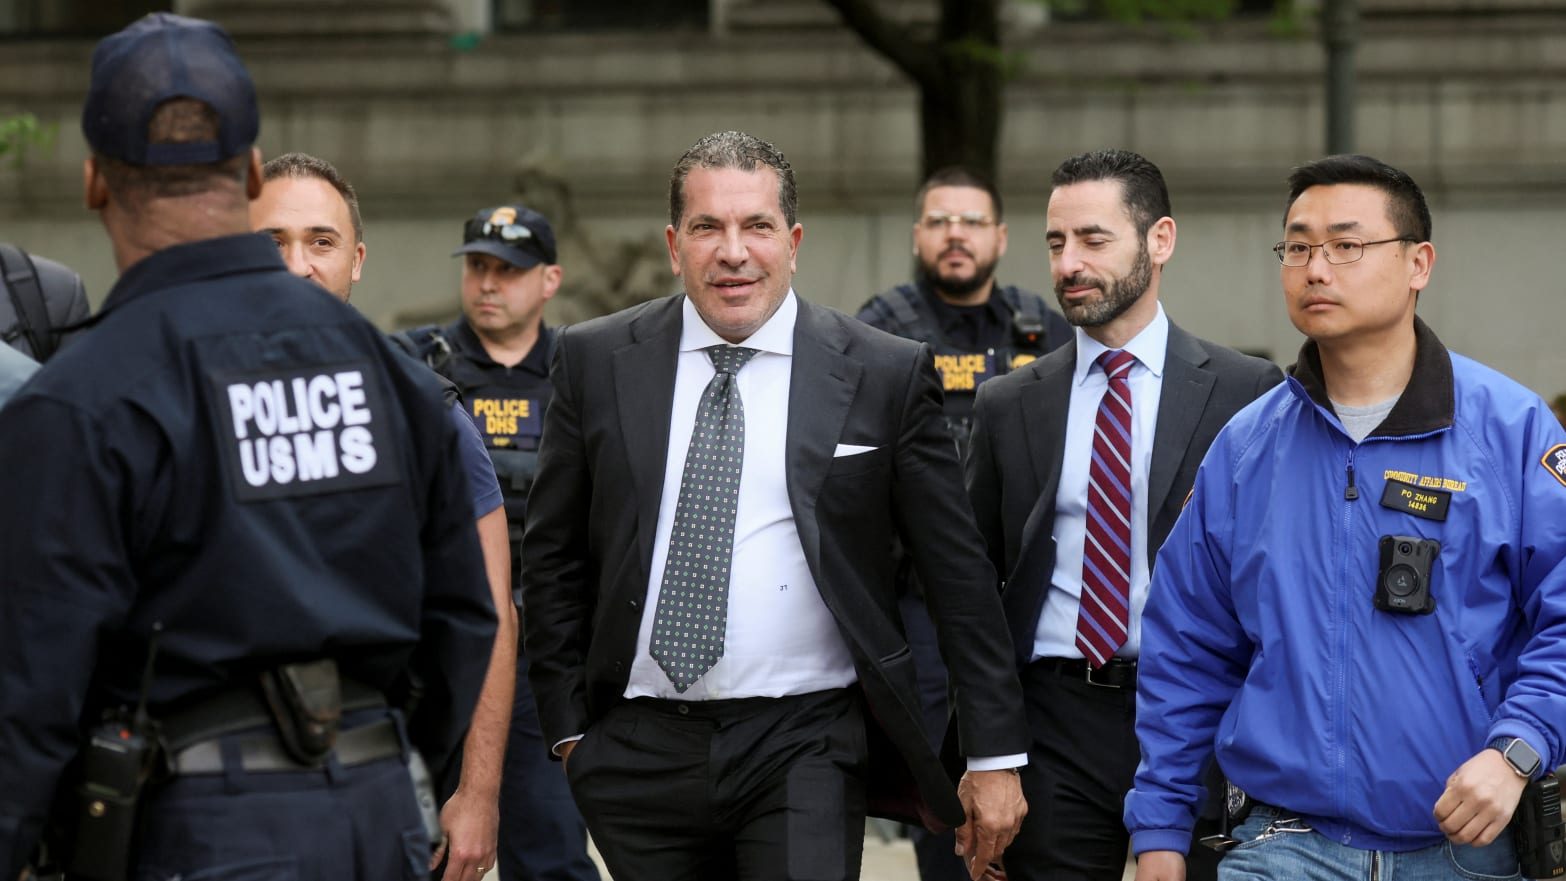 Joe Tacopina, former lawyer of former U.S. President Donald Trump, exits the Manhattan Federal Court following the verdict in the civil rape accusation case against former U.S. President Donald Trump, in New York City, on May 9, 2023.